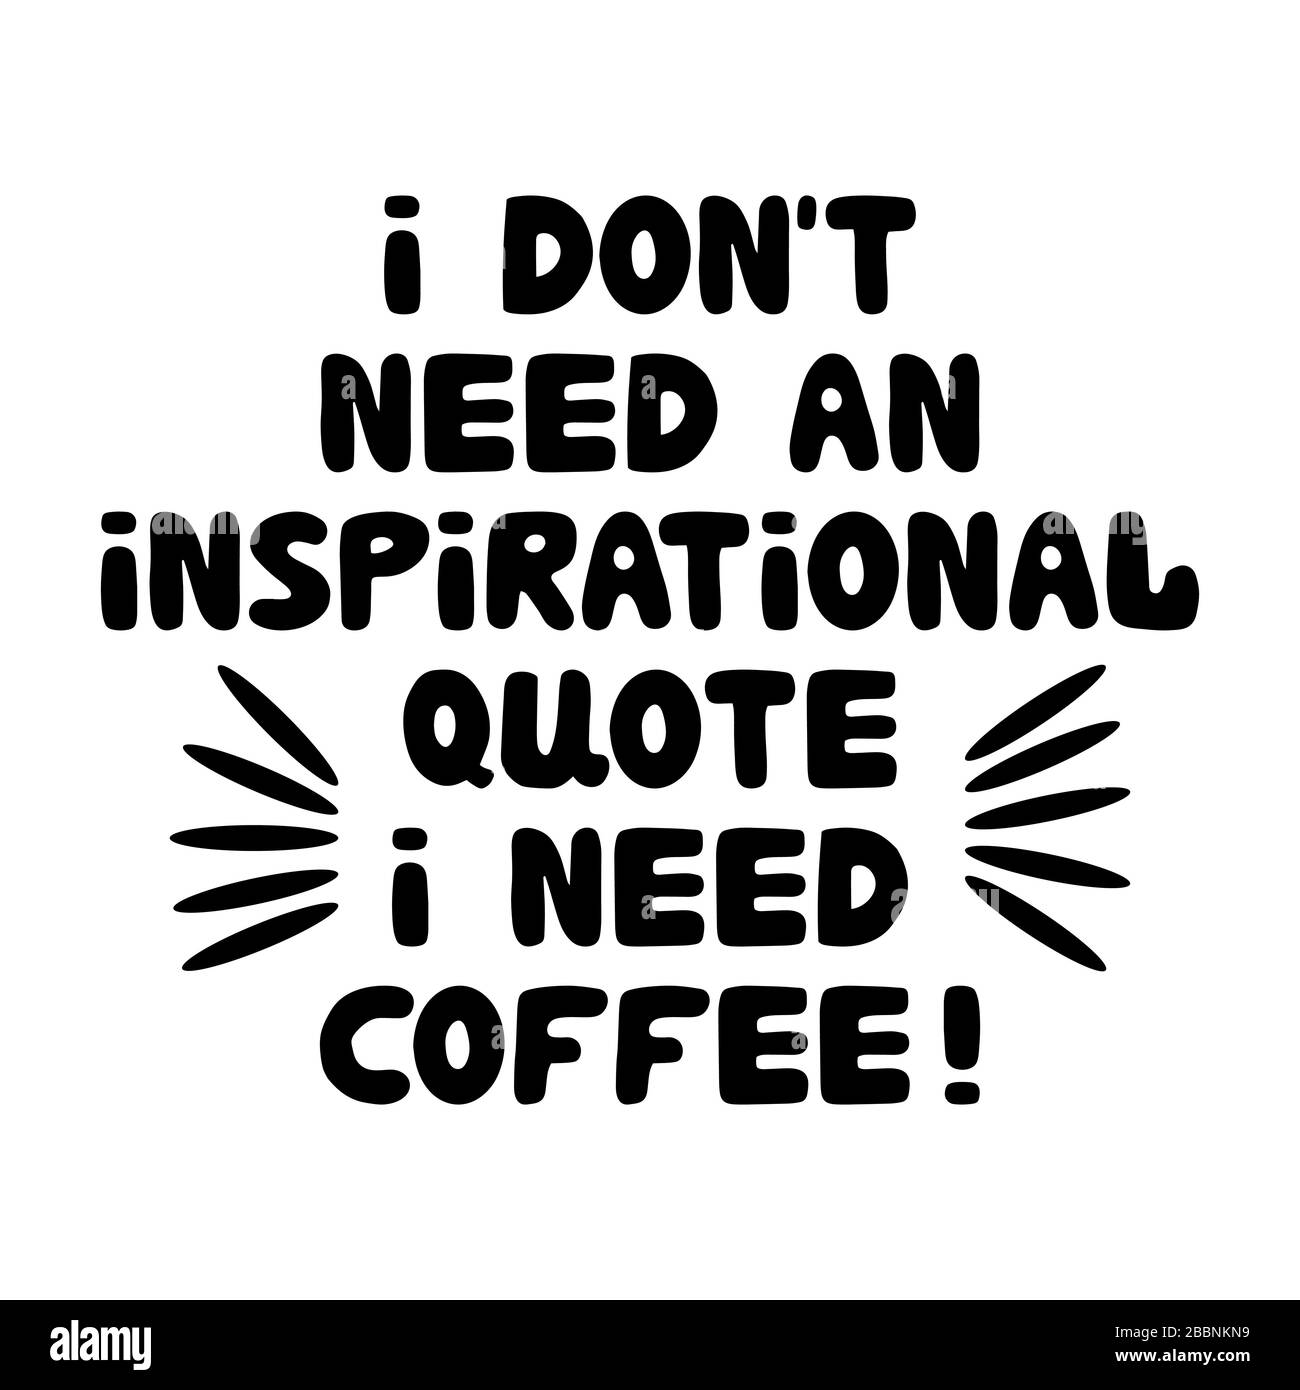 I don't need an inspirational quote I need coffee. Motivation quote. Cute hand drawn bauble lettering. Isolated on white background. Stock illustratio Stock Vector